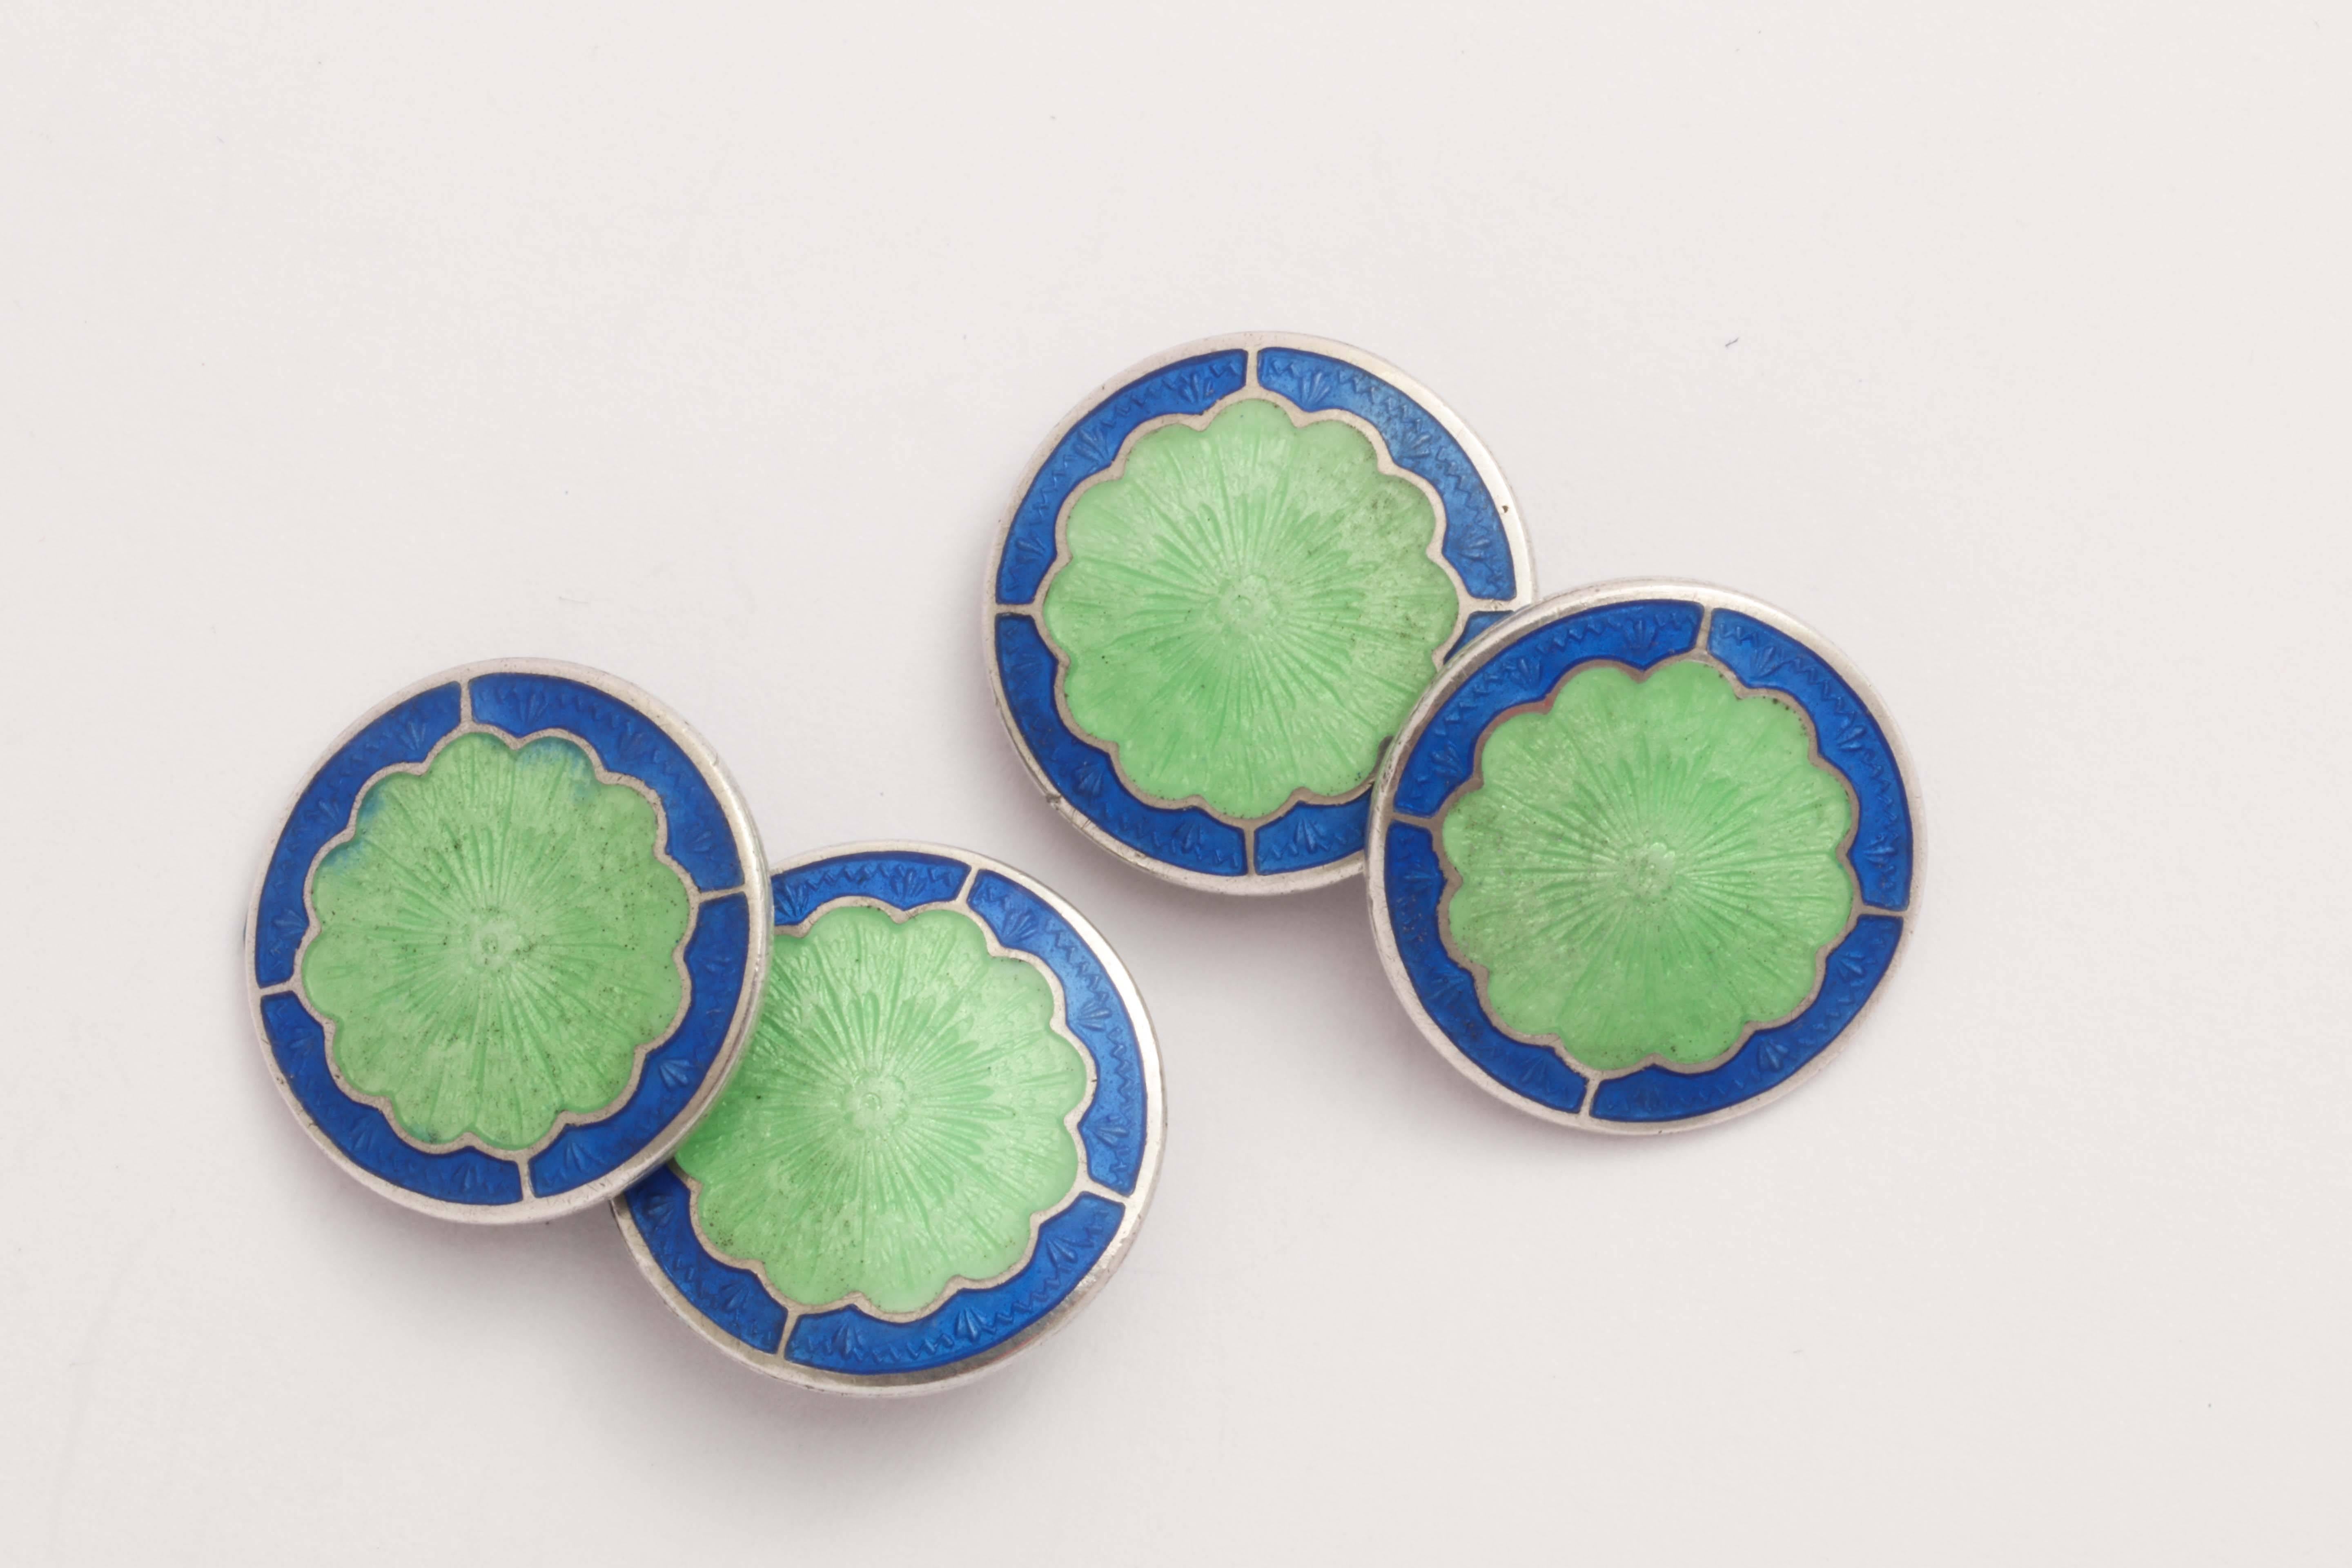 Circular with scalloped green center surrounded by blue border.
Impressed STERLING/ B back to back with an R.